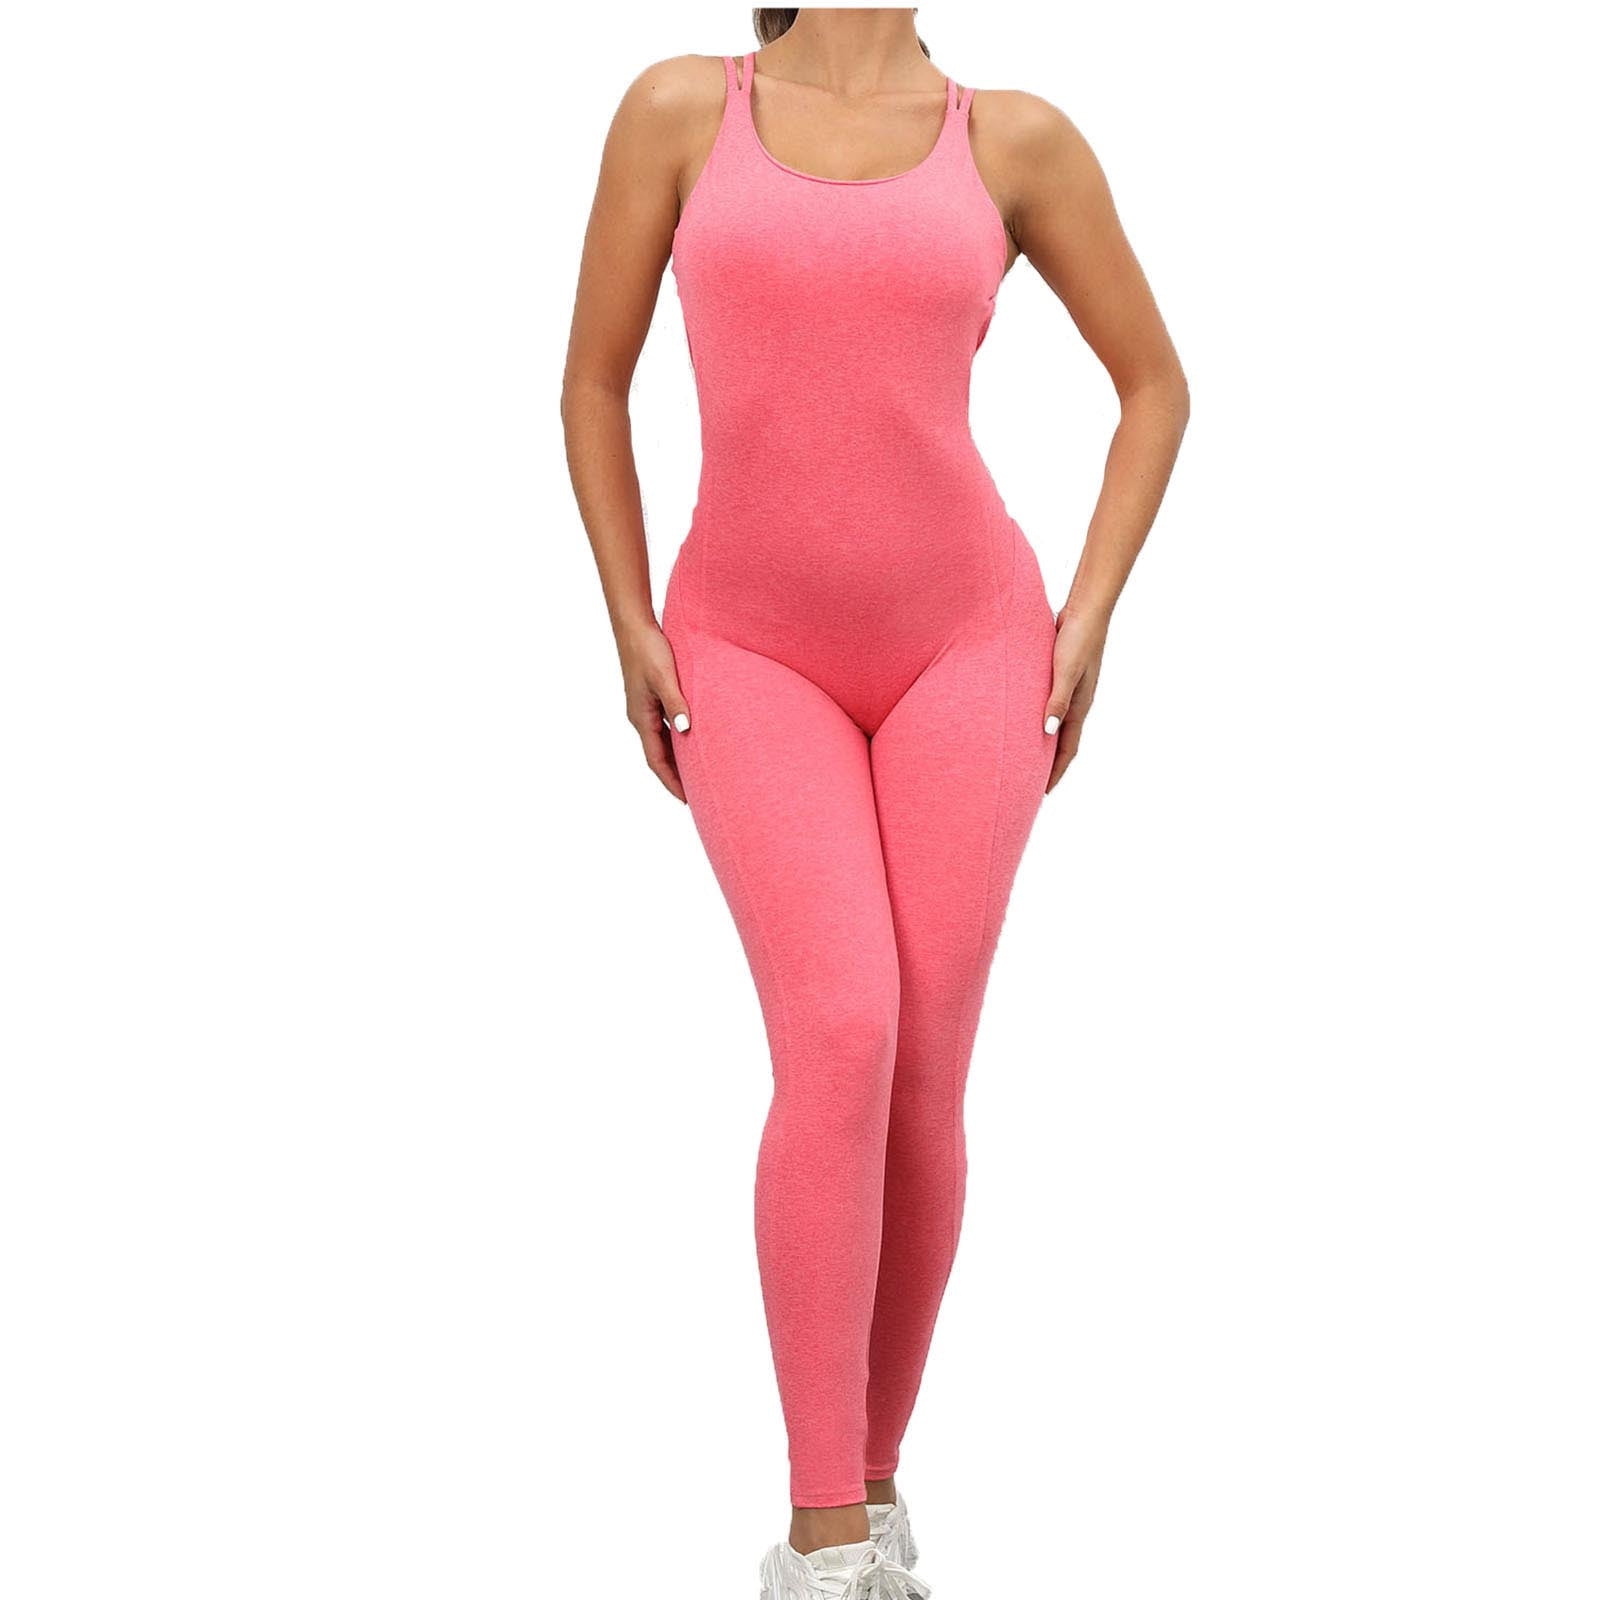 Ayolanni Booty Lifting Leggings for Women Women's One-Piece Sport Yoga  Jumpsuit Running Fitness Workout Gym Tight Pants 